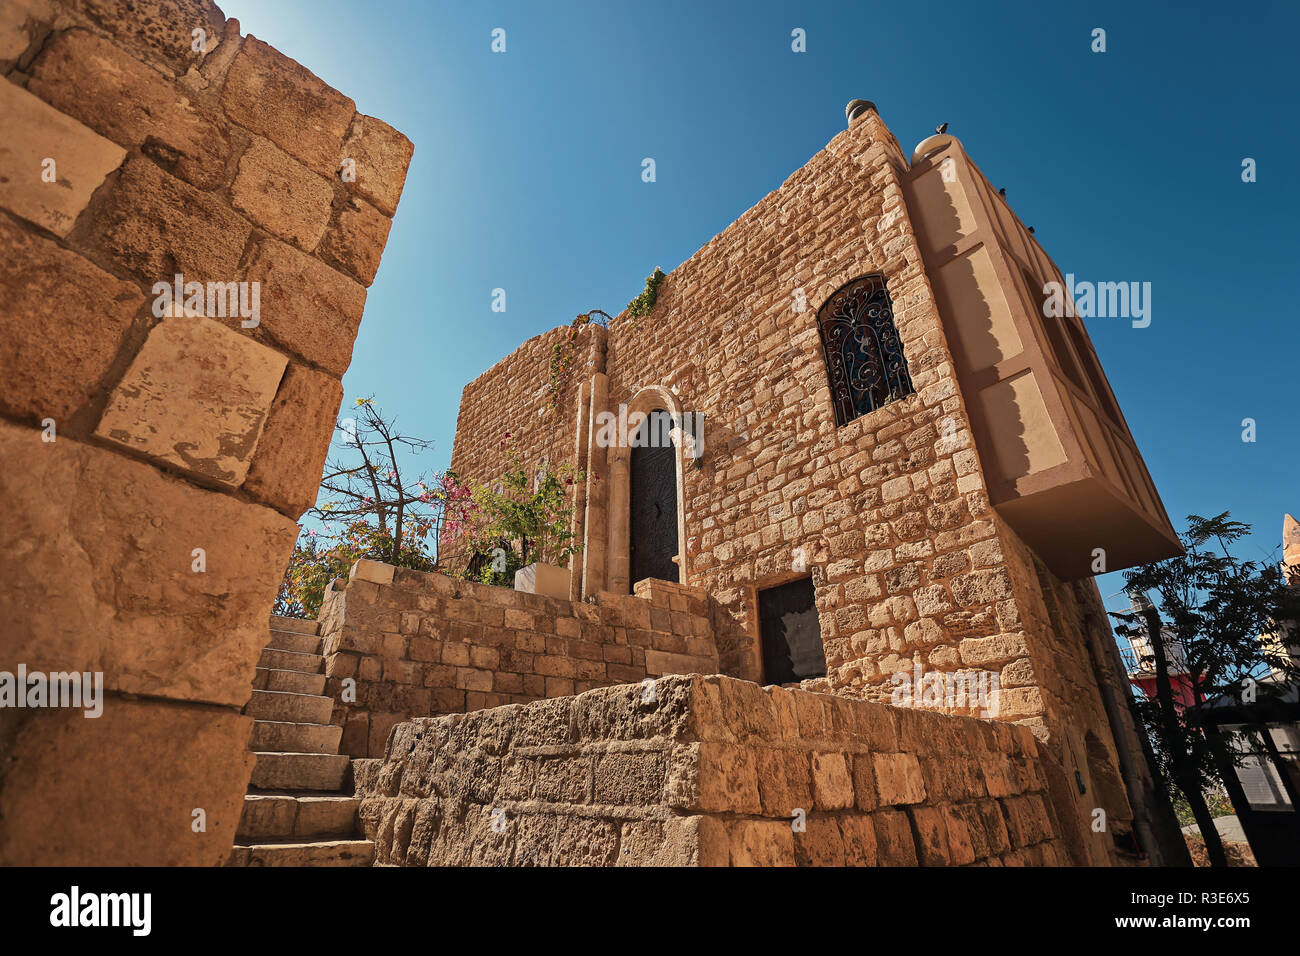 View of the old stone street of Jaffa in Tel Aviv. Stock Photo